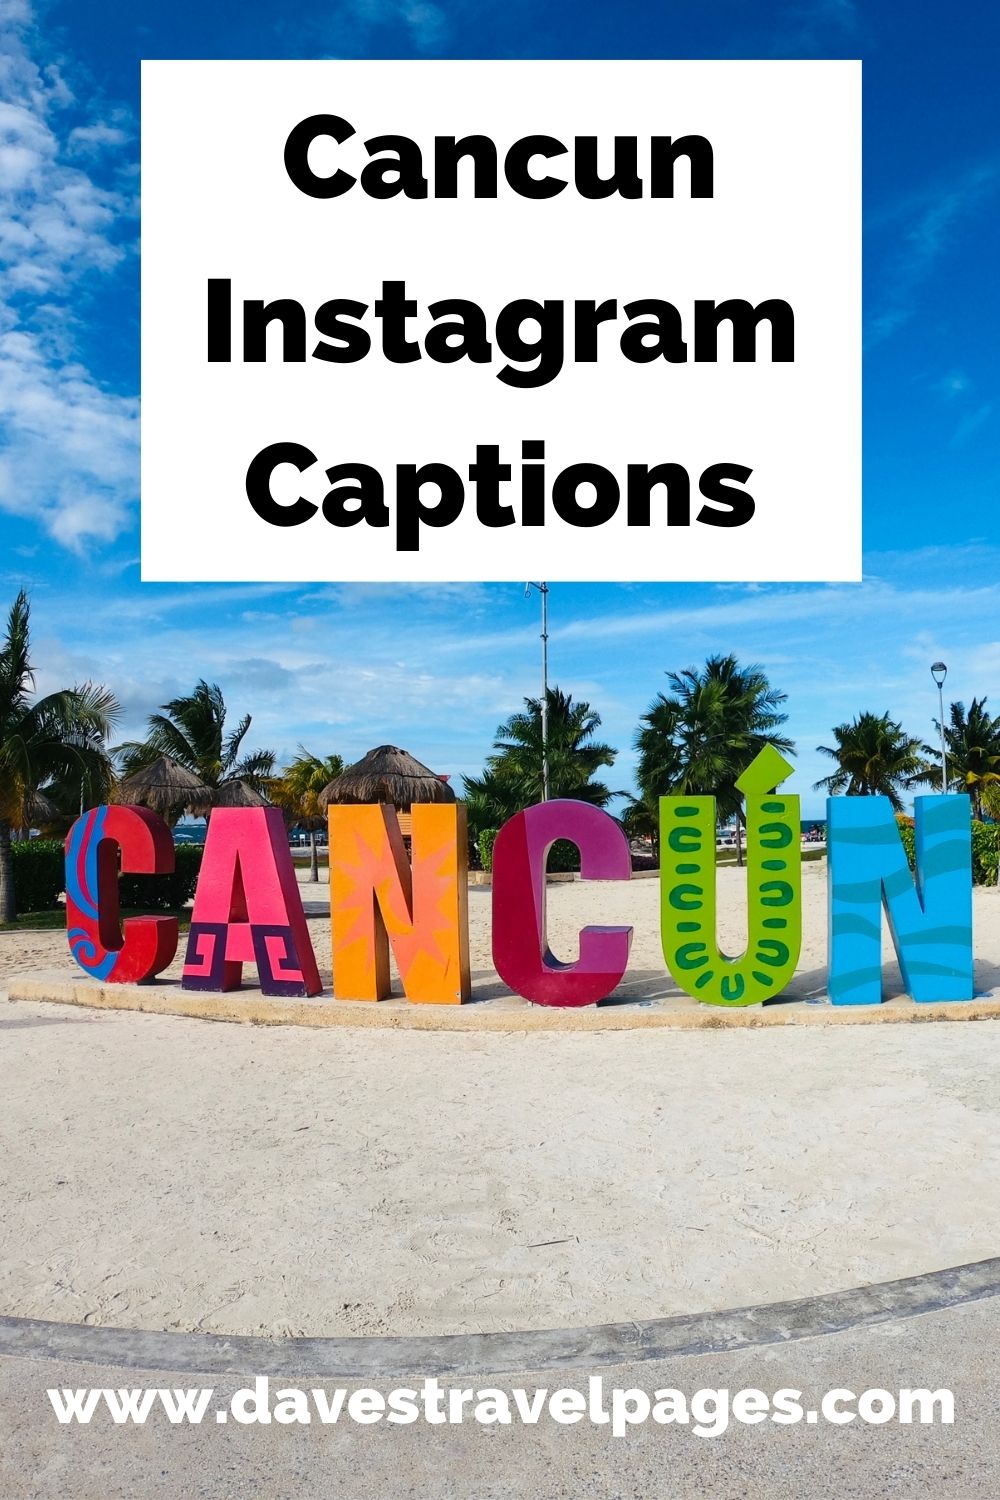 Cancun Instagram Captions, Quotes, and Puns